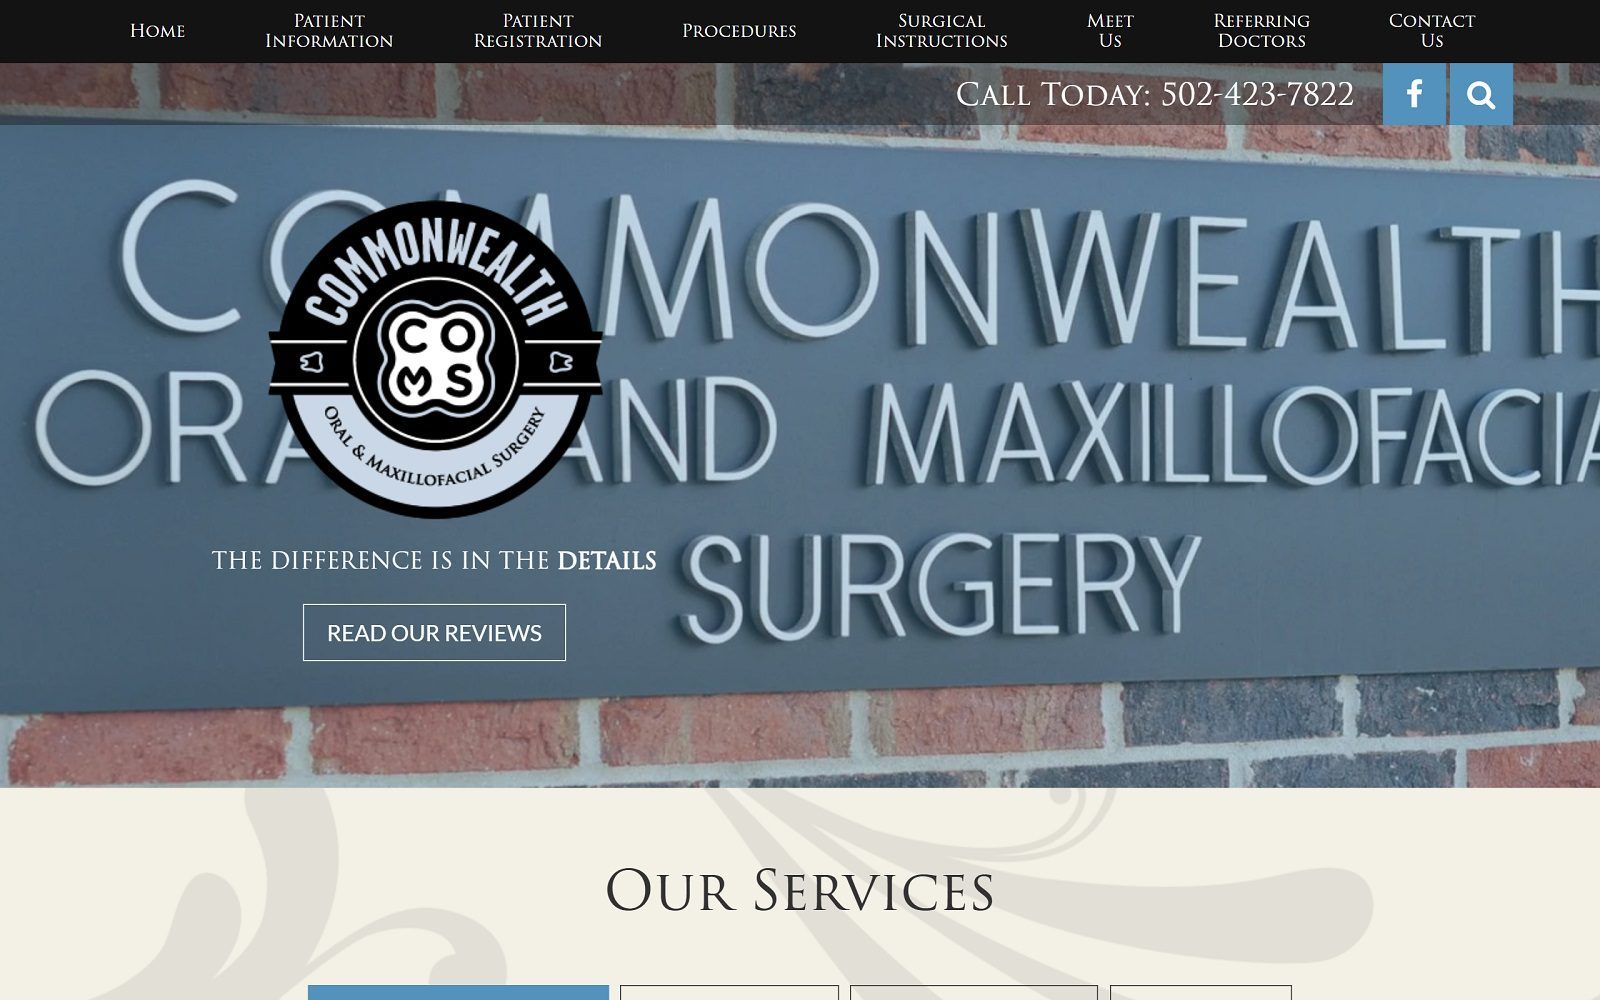 The screenshot of commonwealth oral and maxillofacial surgery: timothy acord, dds website